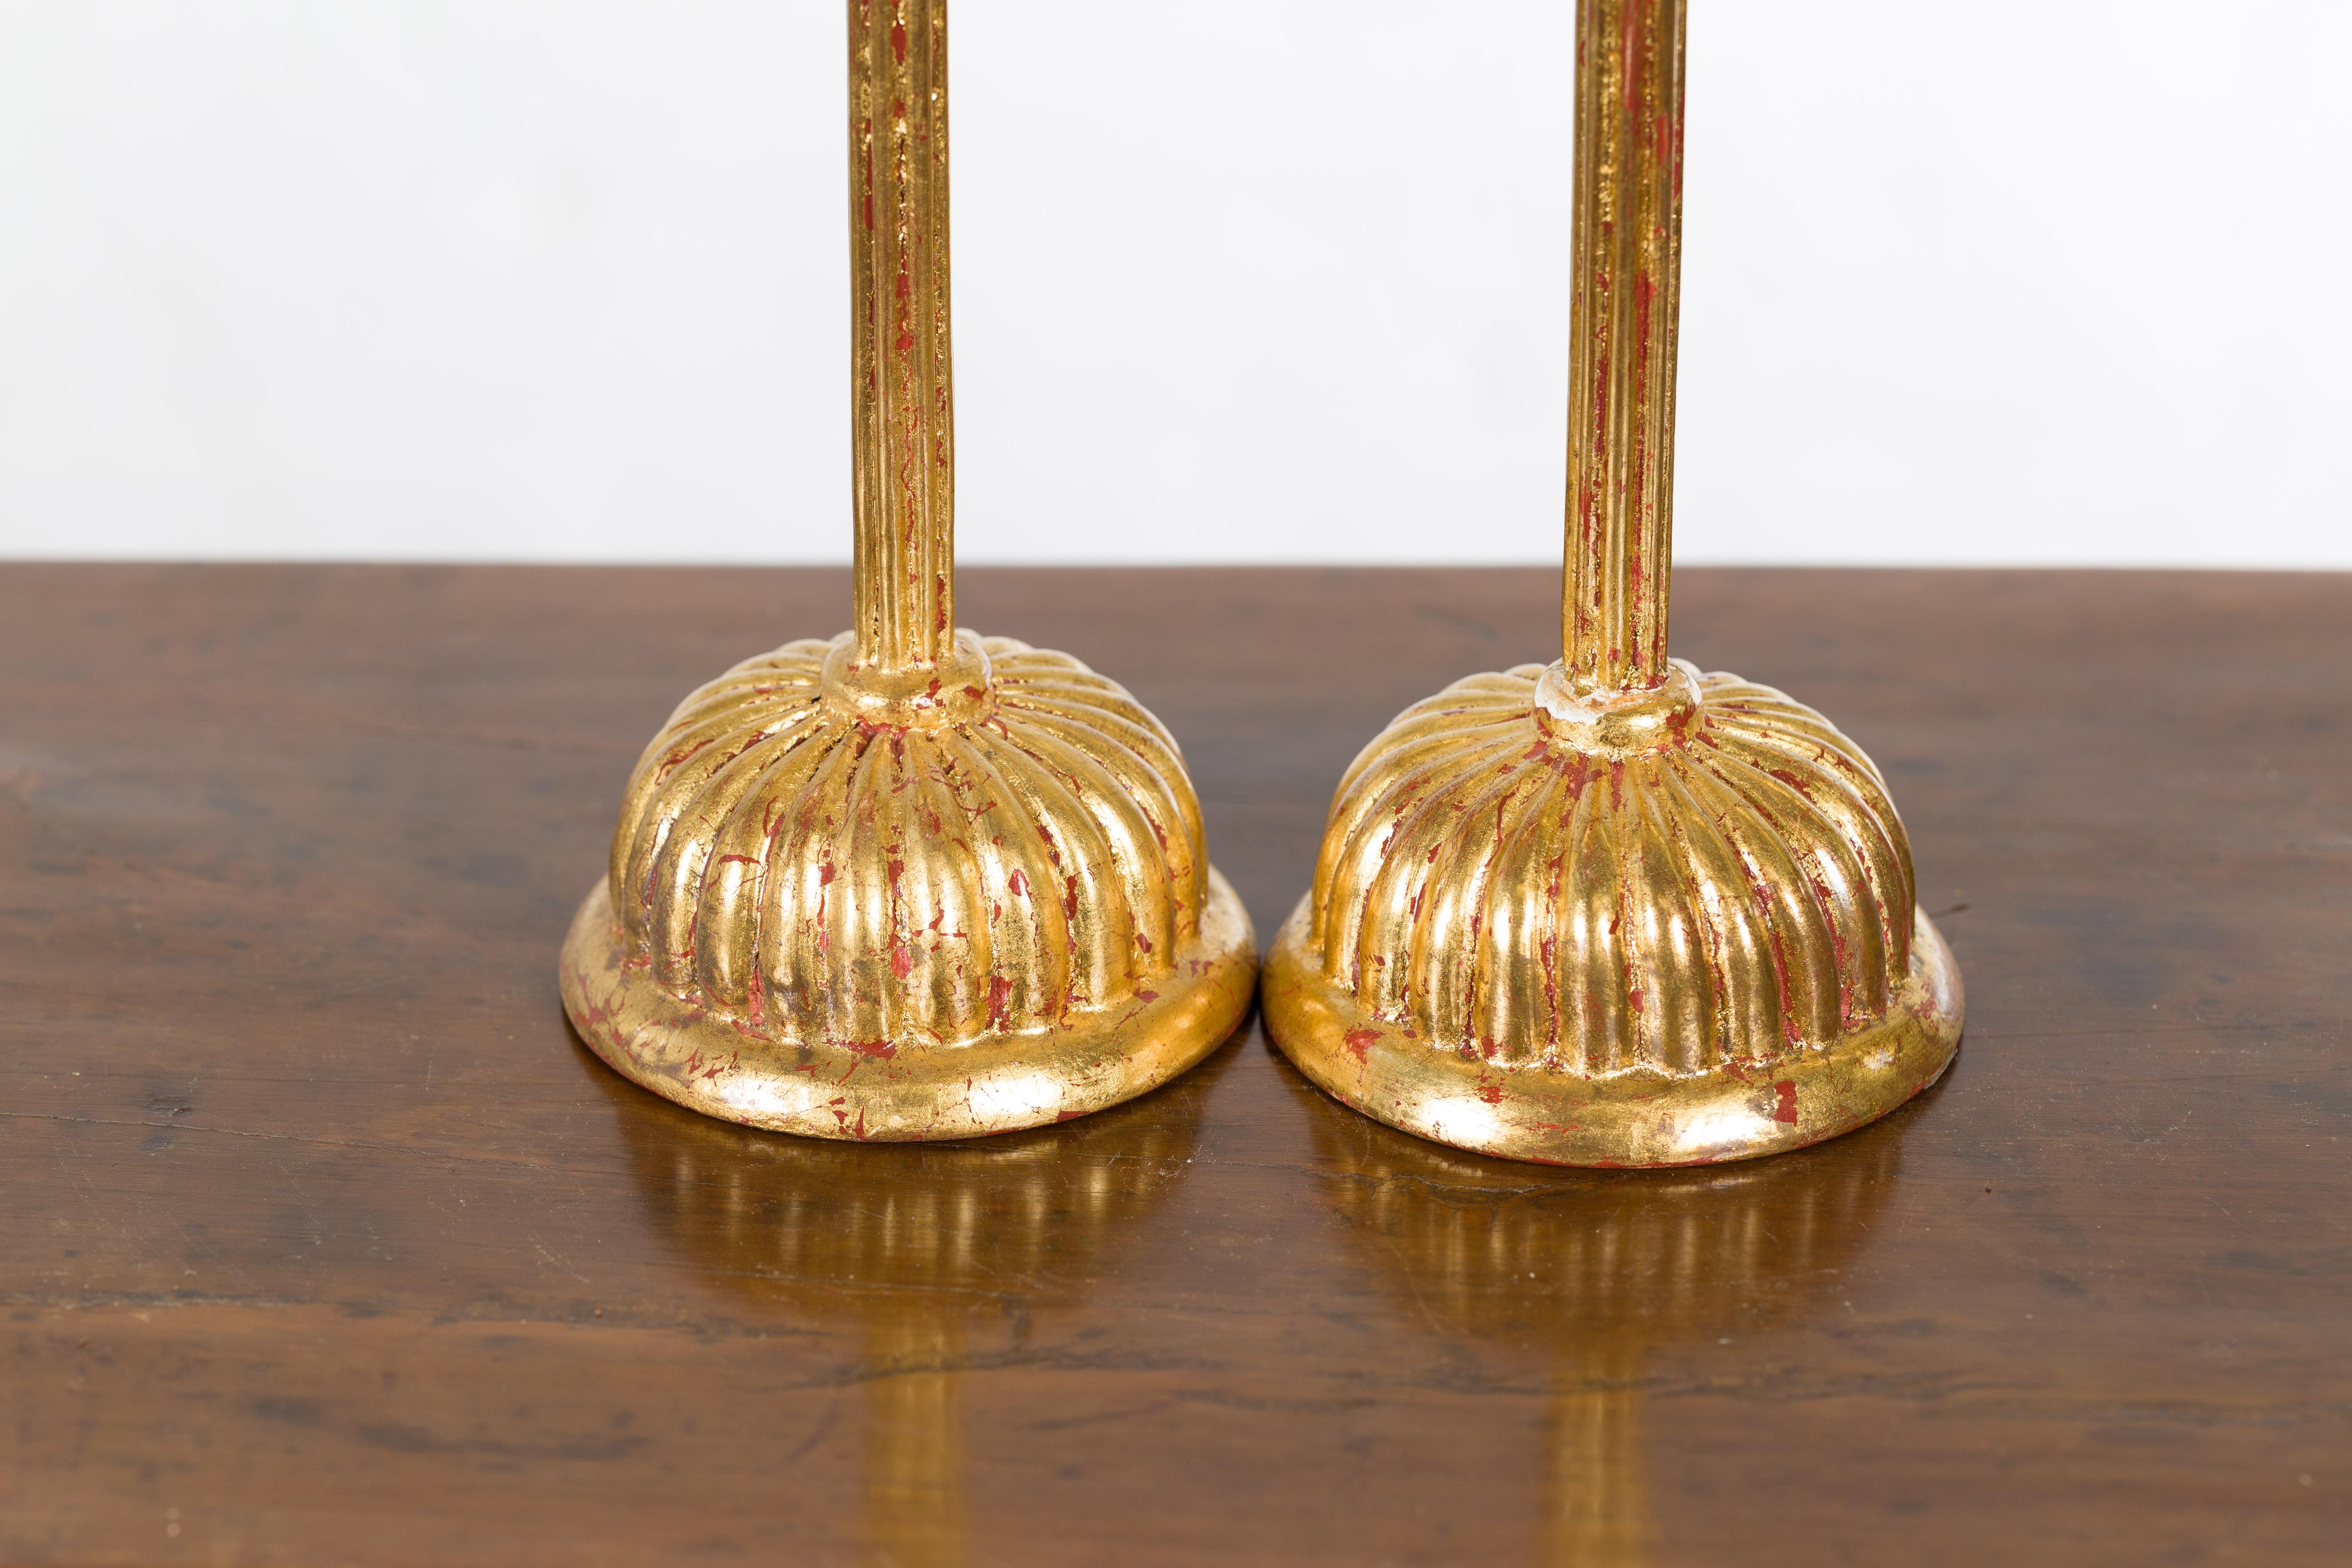 A pair of Japanese vintage gold lacquered candleholders from the mid 20th century with lotus bobèches from a Hinamatsuri set. Created in Japan during the midcentury period, each of this pair of candleholders features a lotus shaped bobèche sitting